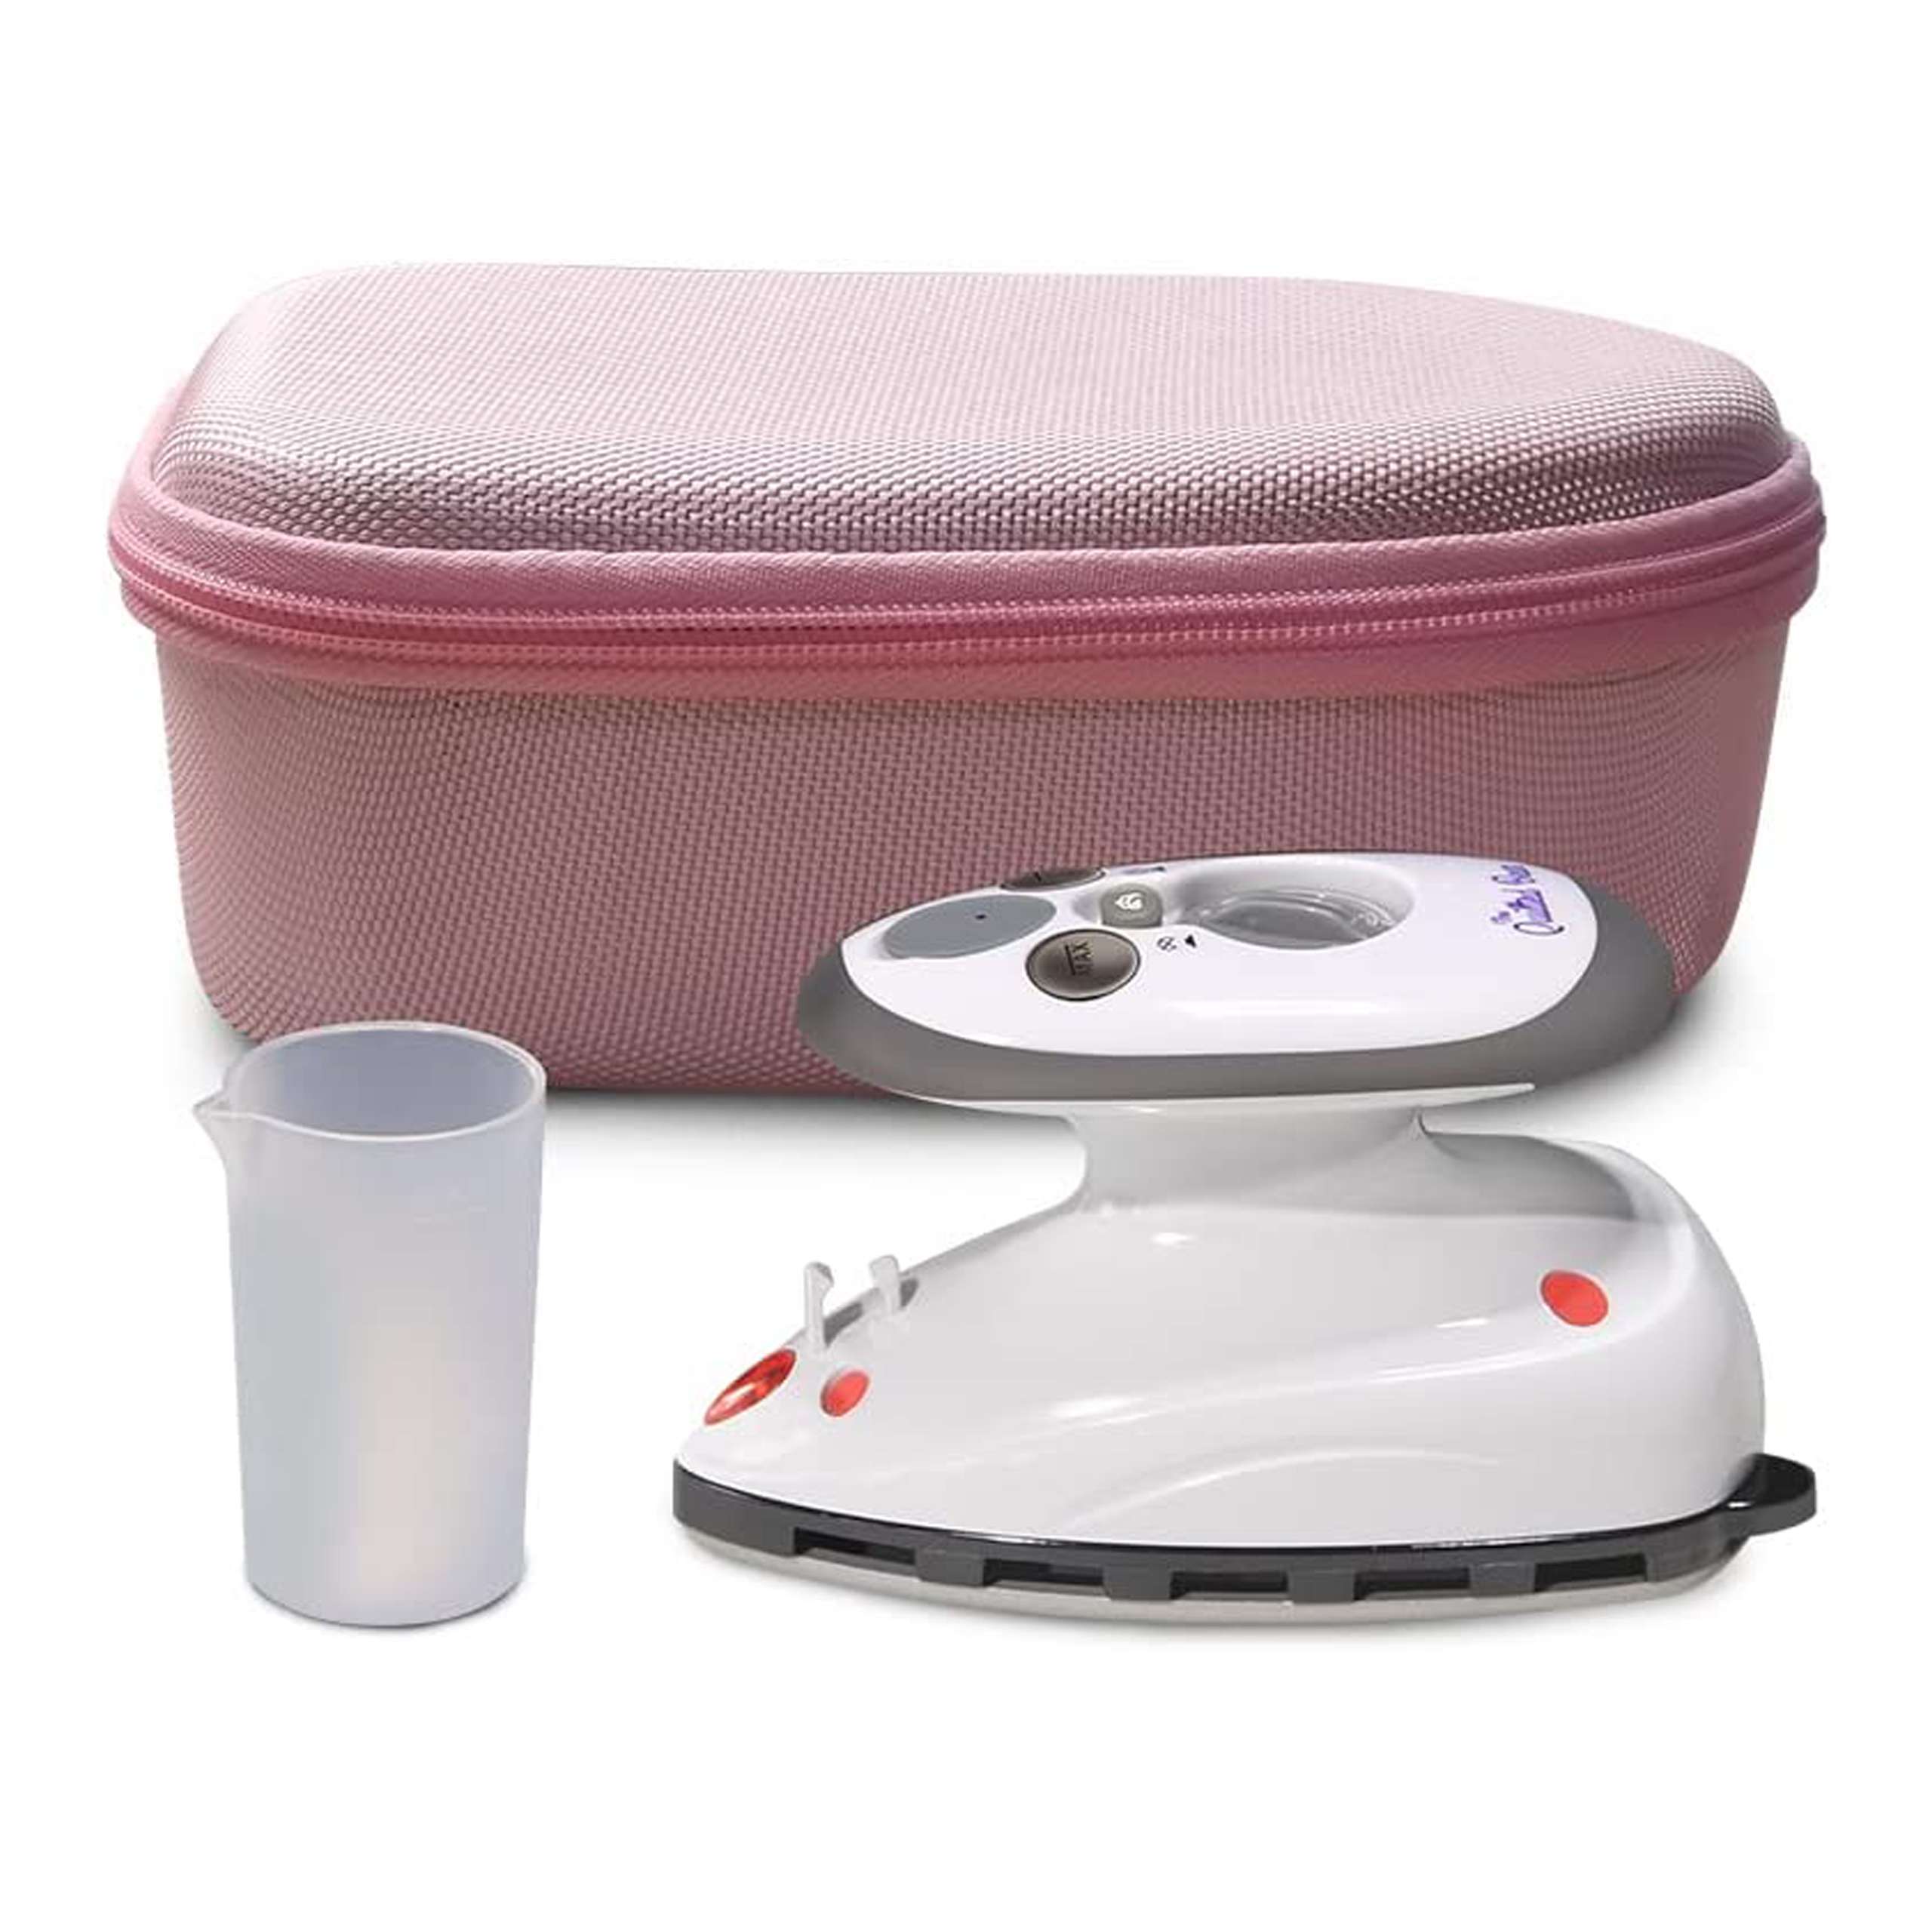 The Quilted Bear Mini Iron - Lightweight Mini Steam Iron with Ceramic Sole  Base Plate & Temperature Gauge for use as a Quilting Iron or Travel Iron